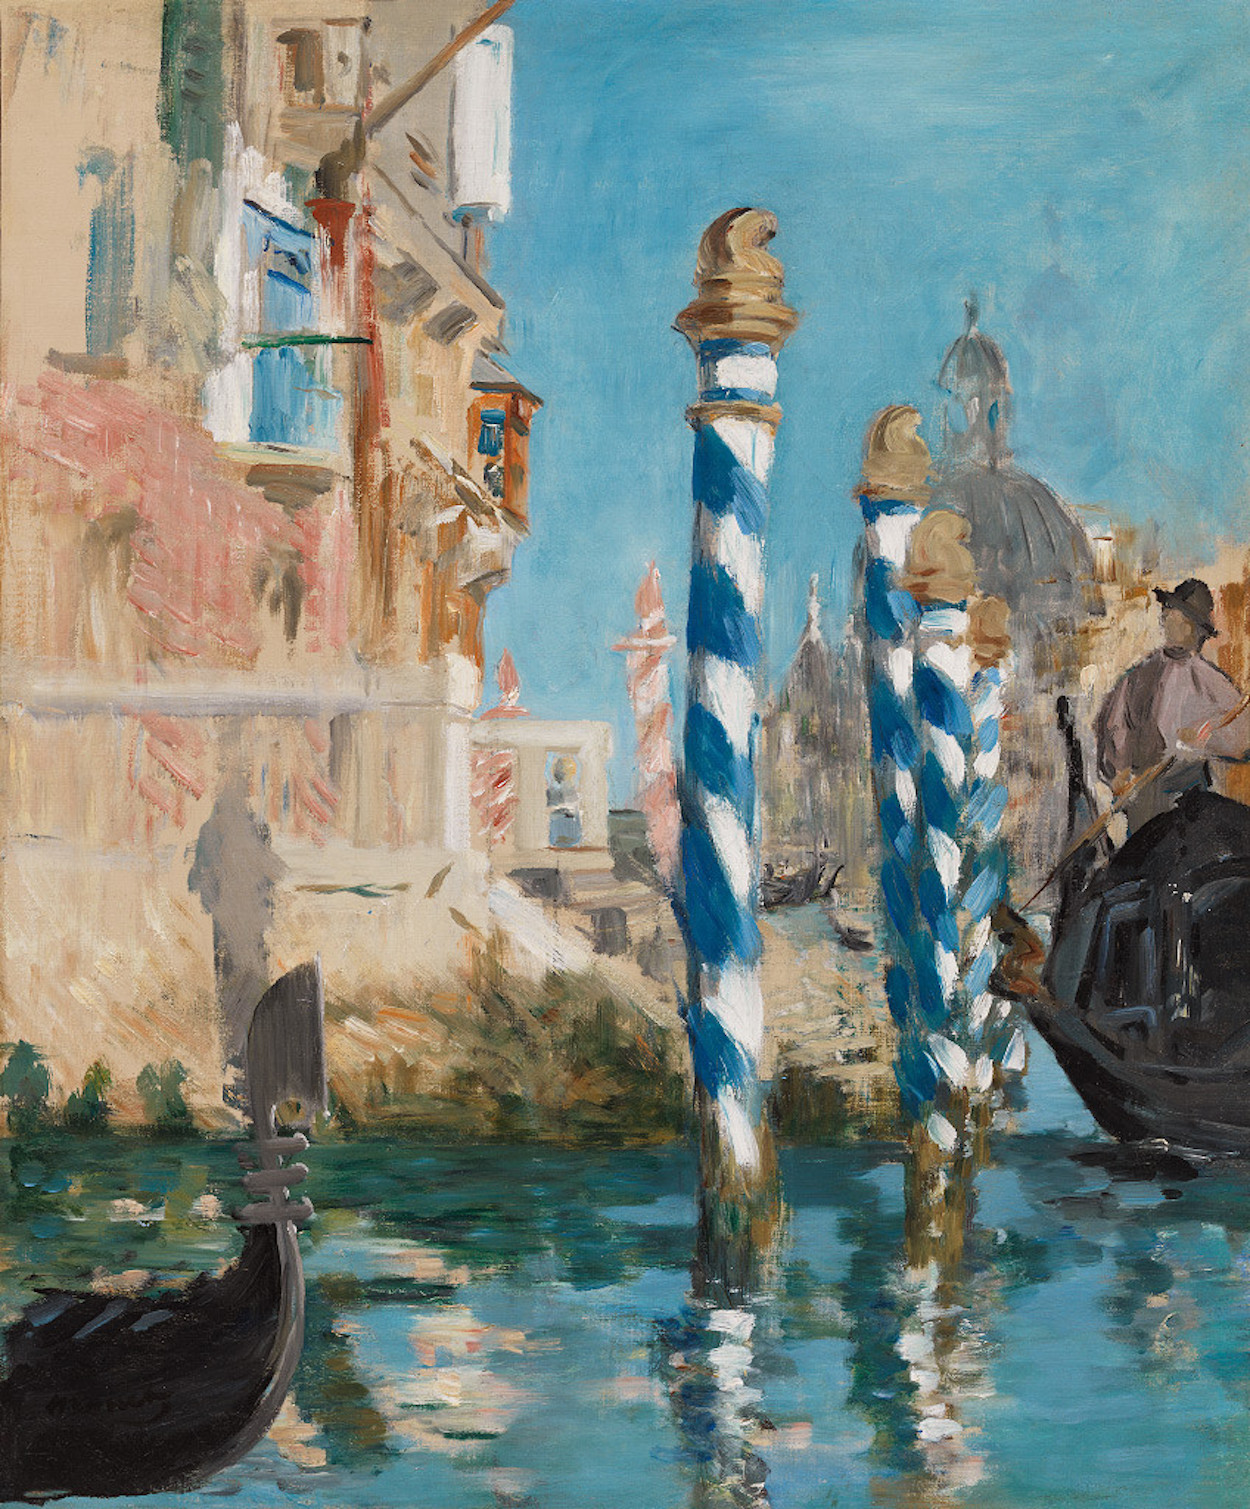 Canal Grande in Venedig by Édouard Manet - 1875 - 57 x 47,5 cm Private Sammlung